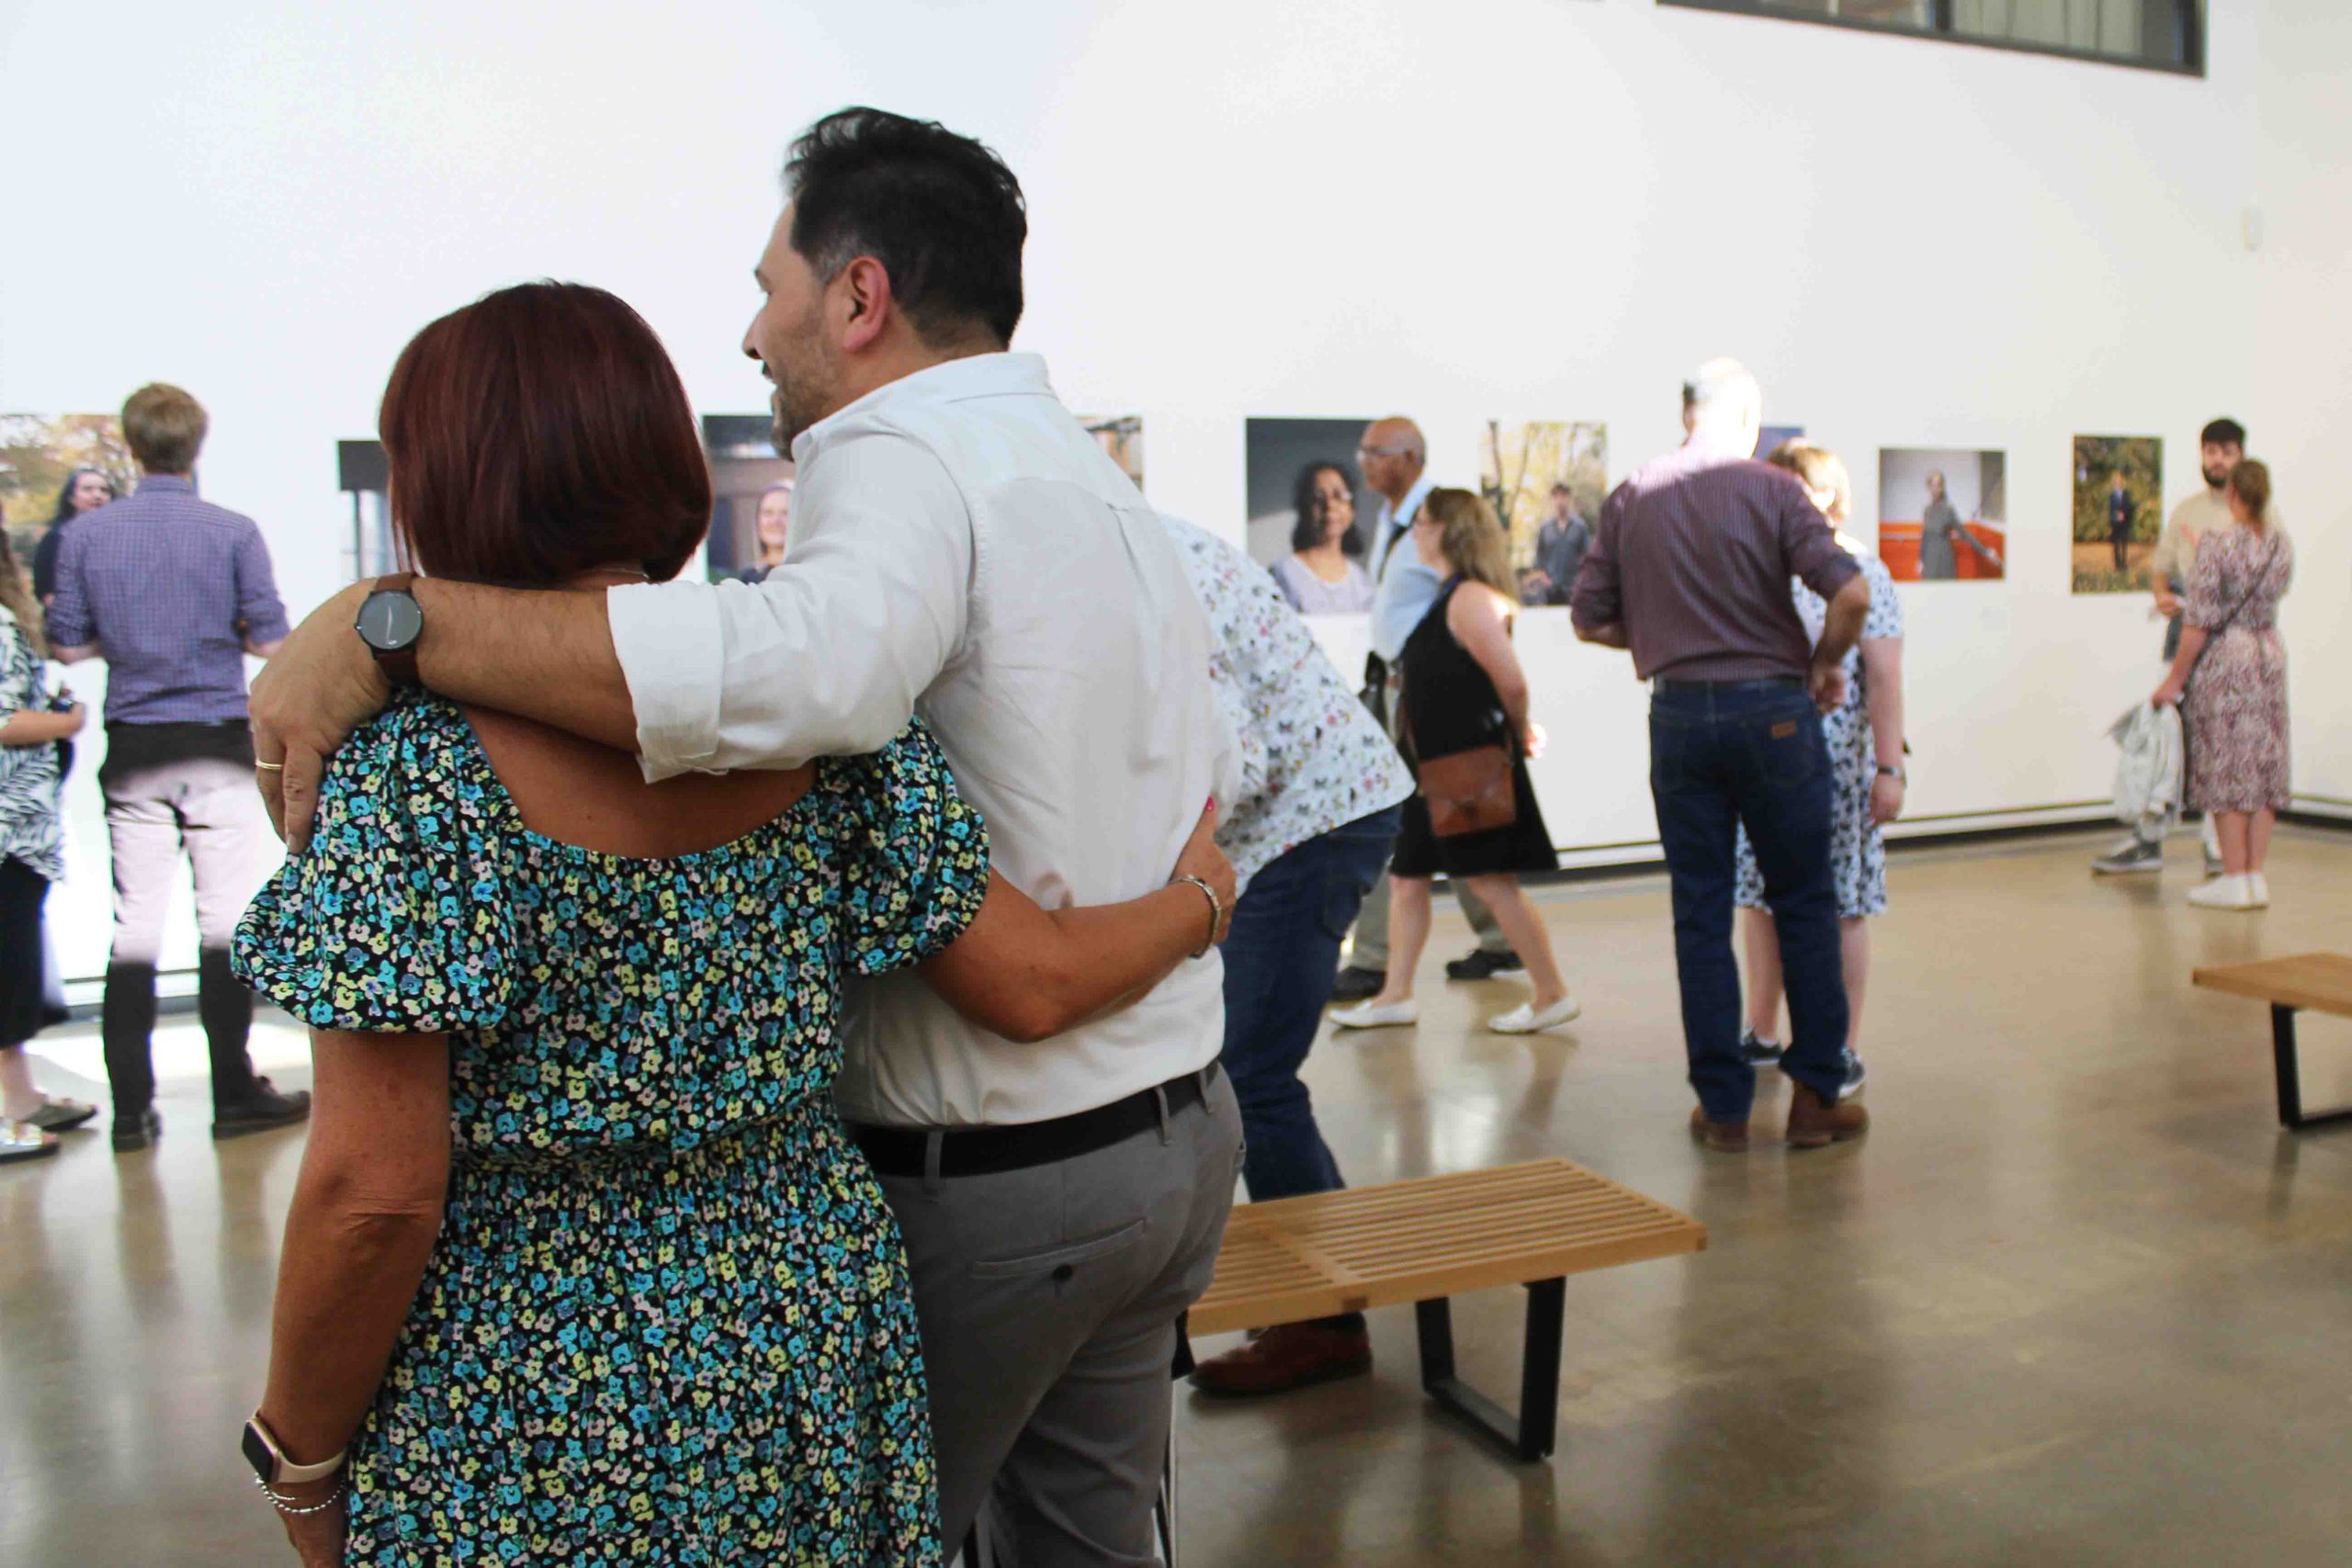 A man and a women with their arms around each other and their backs to the camera. Beyond them are people in a gallery.